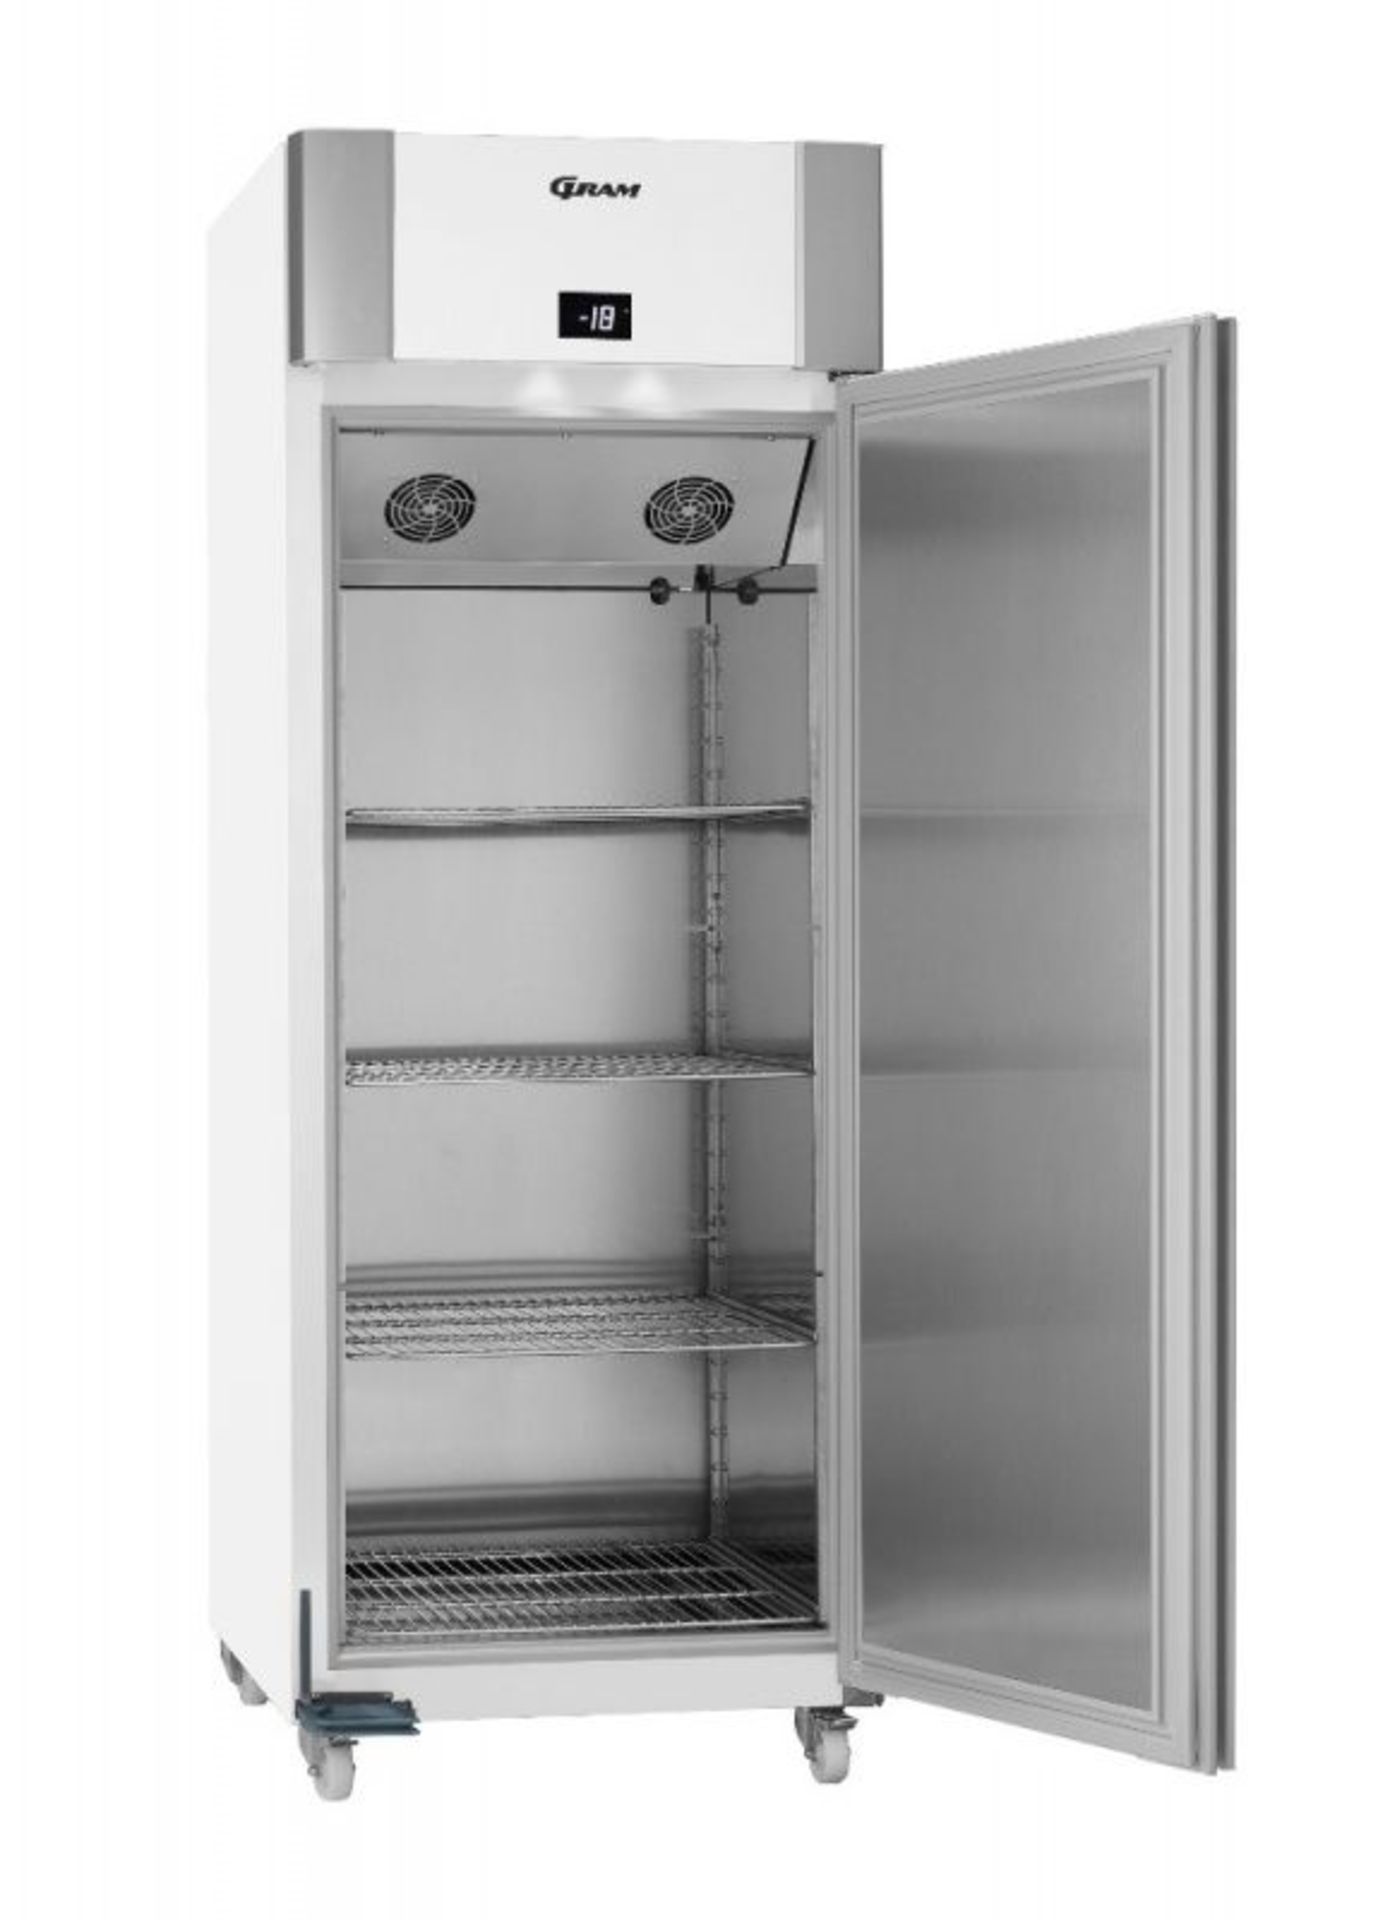 ECO TWIN F 82 LAG C1 4N Commercial Freezer - Image 2 of 2